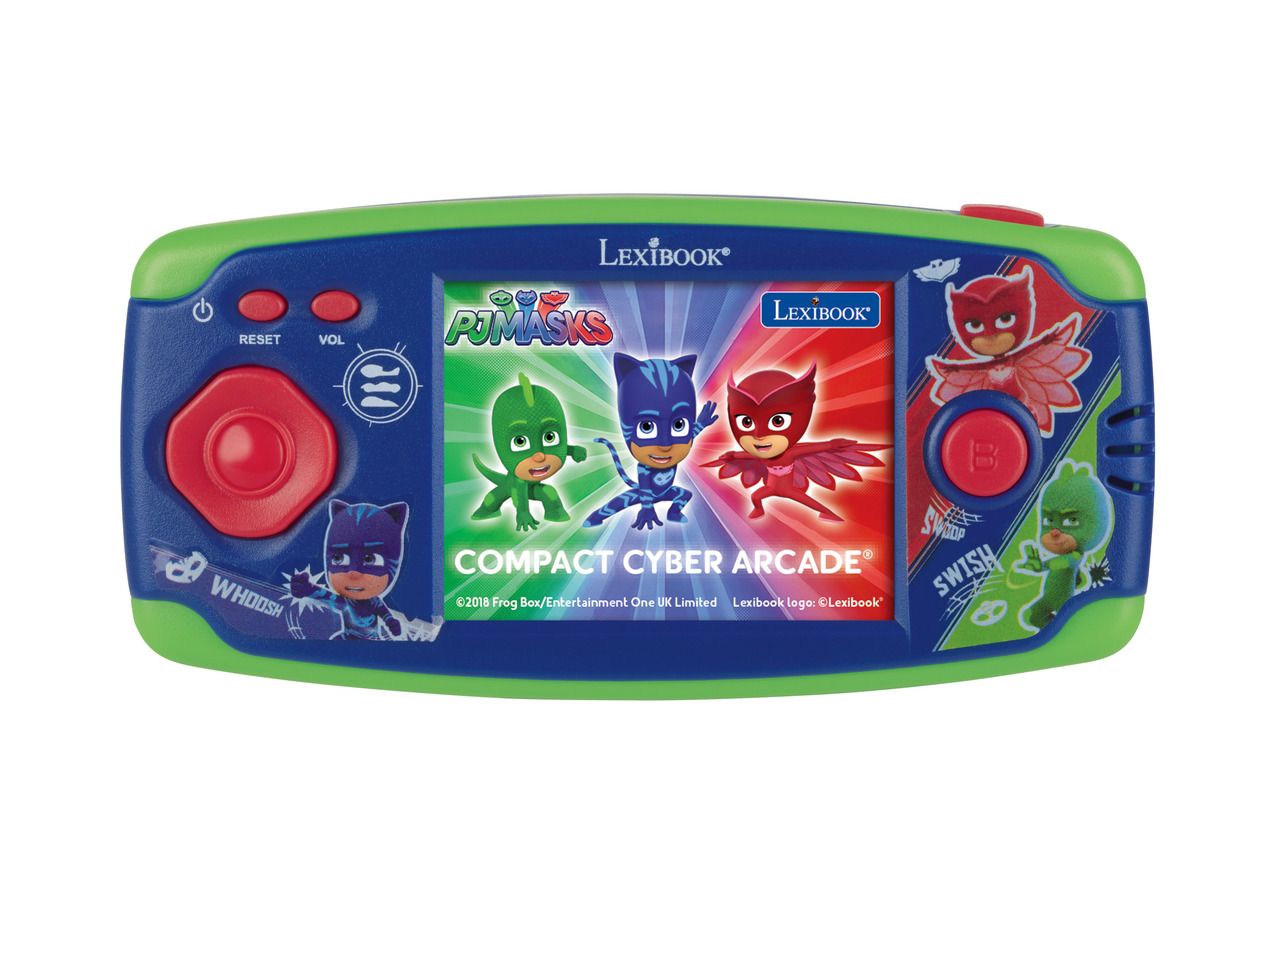 LEXIBOOK LCD Character Game Console